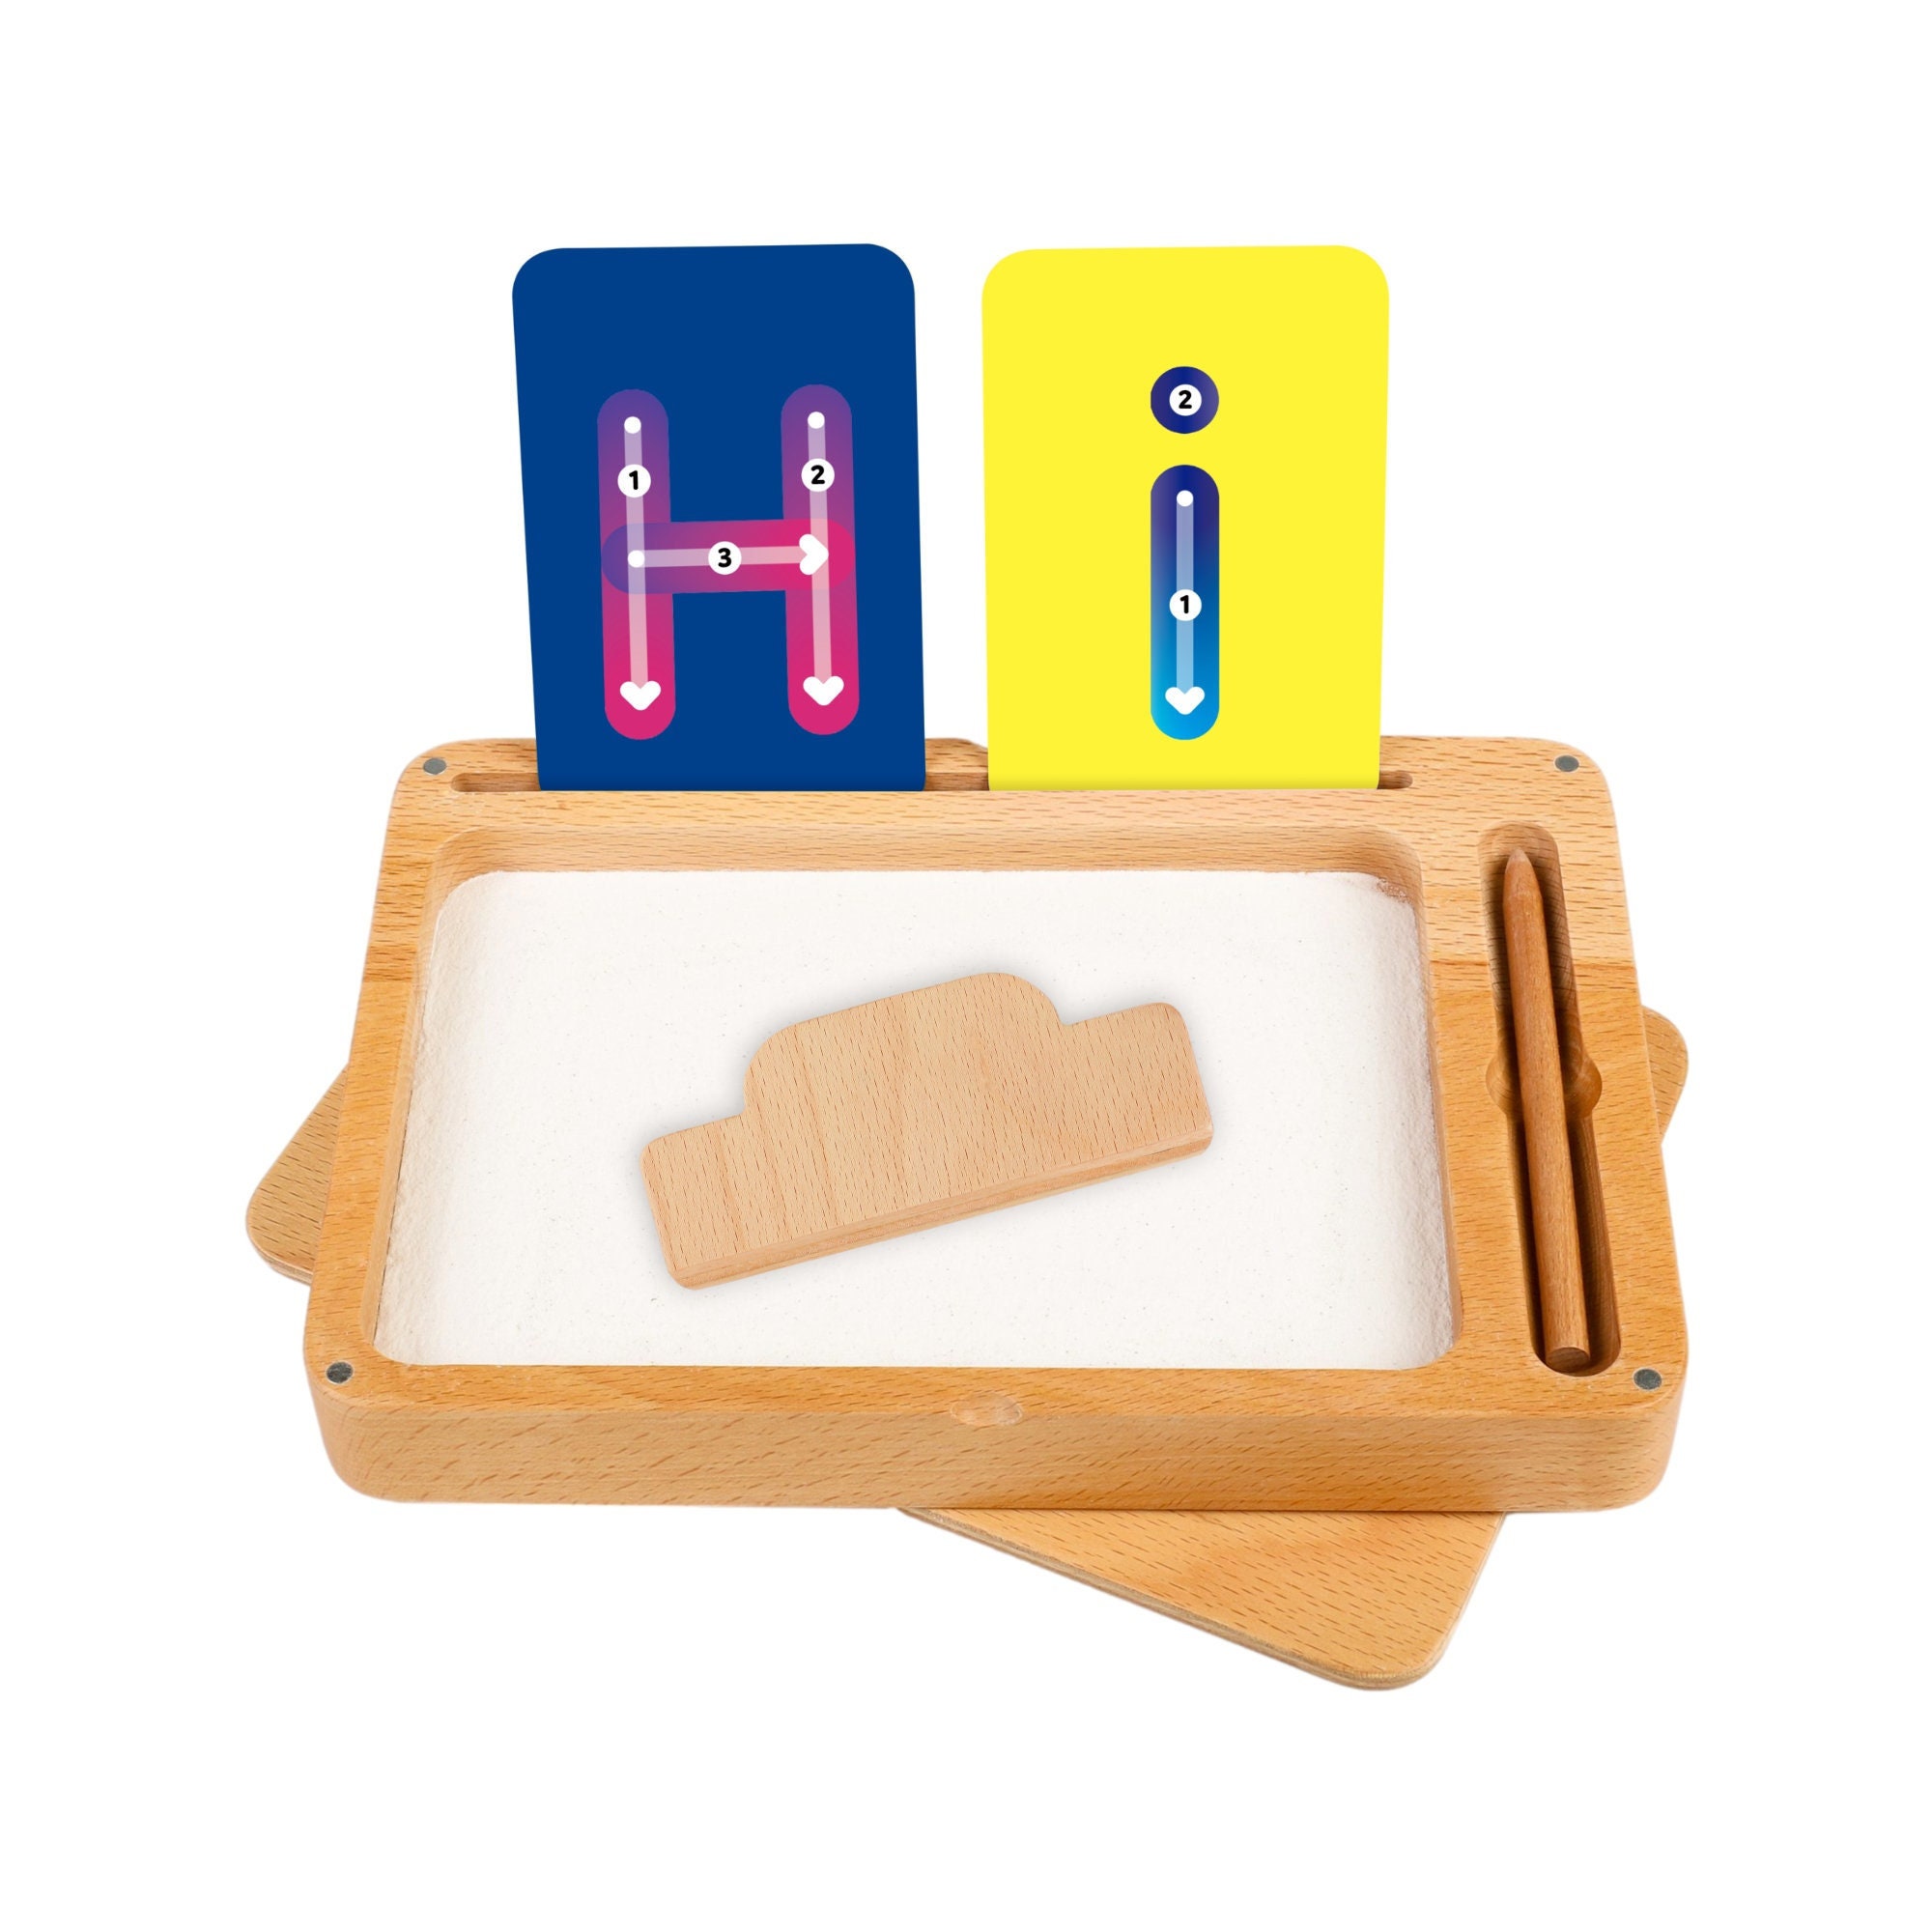 Basic Wooden Sand Tray with Lid – Sand Tray Therapy